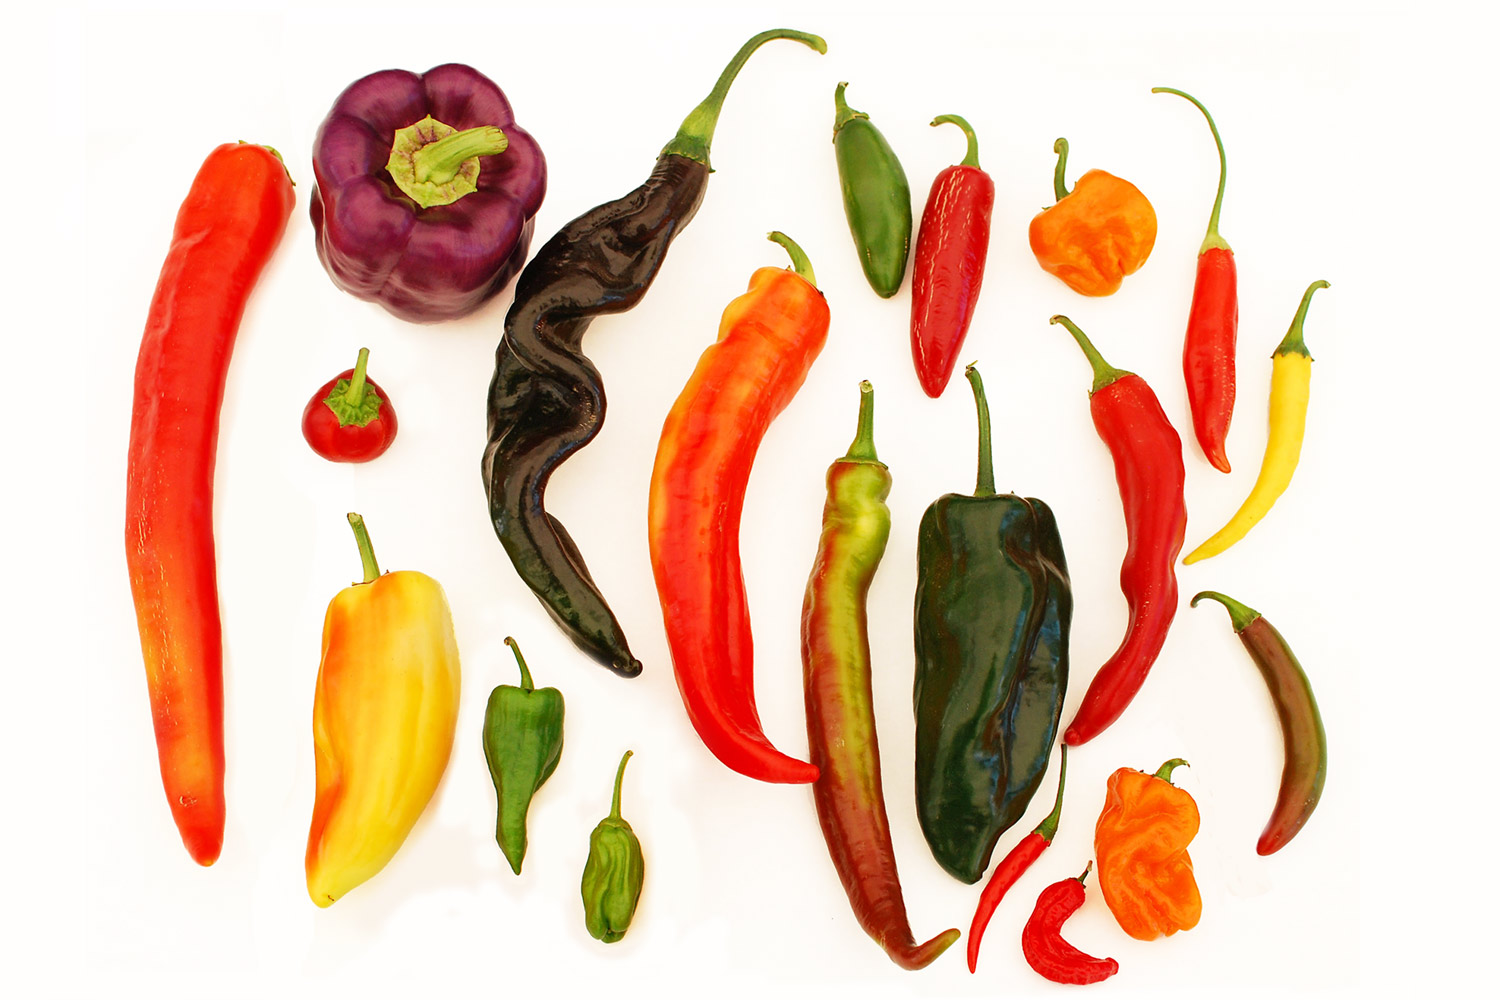 https://foodwise.org/wp-content/uploads/2022/08/peppers_noname_0.jpg